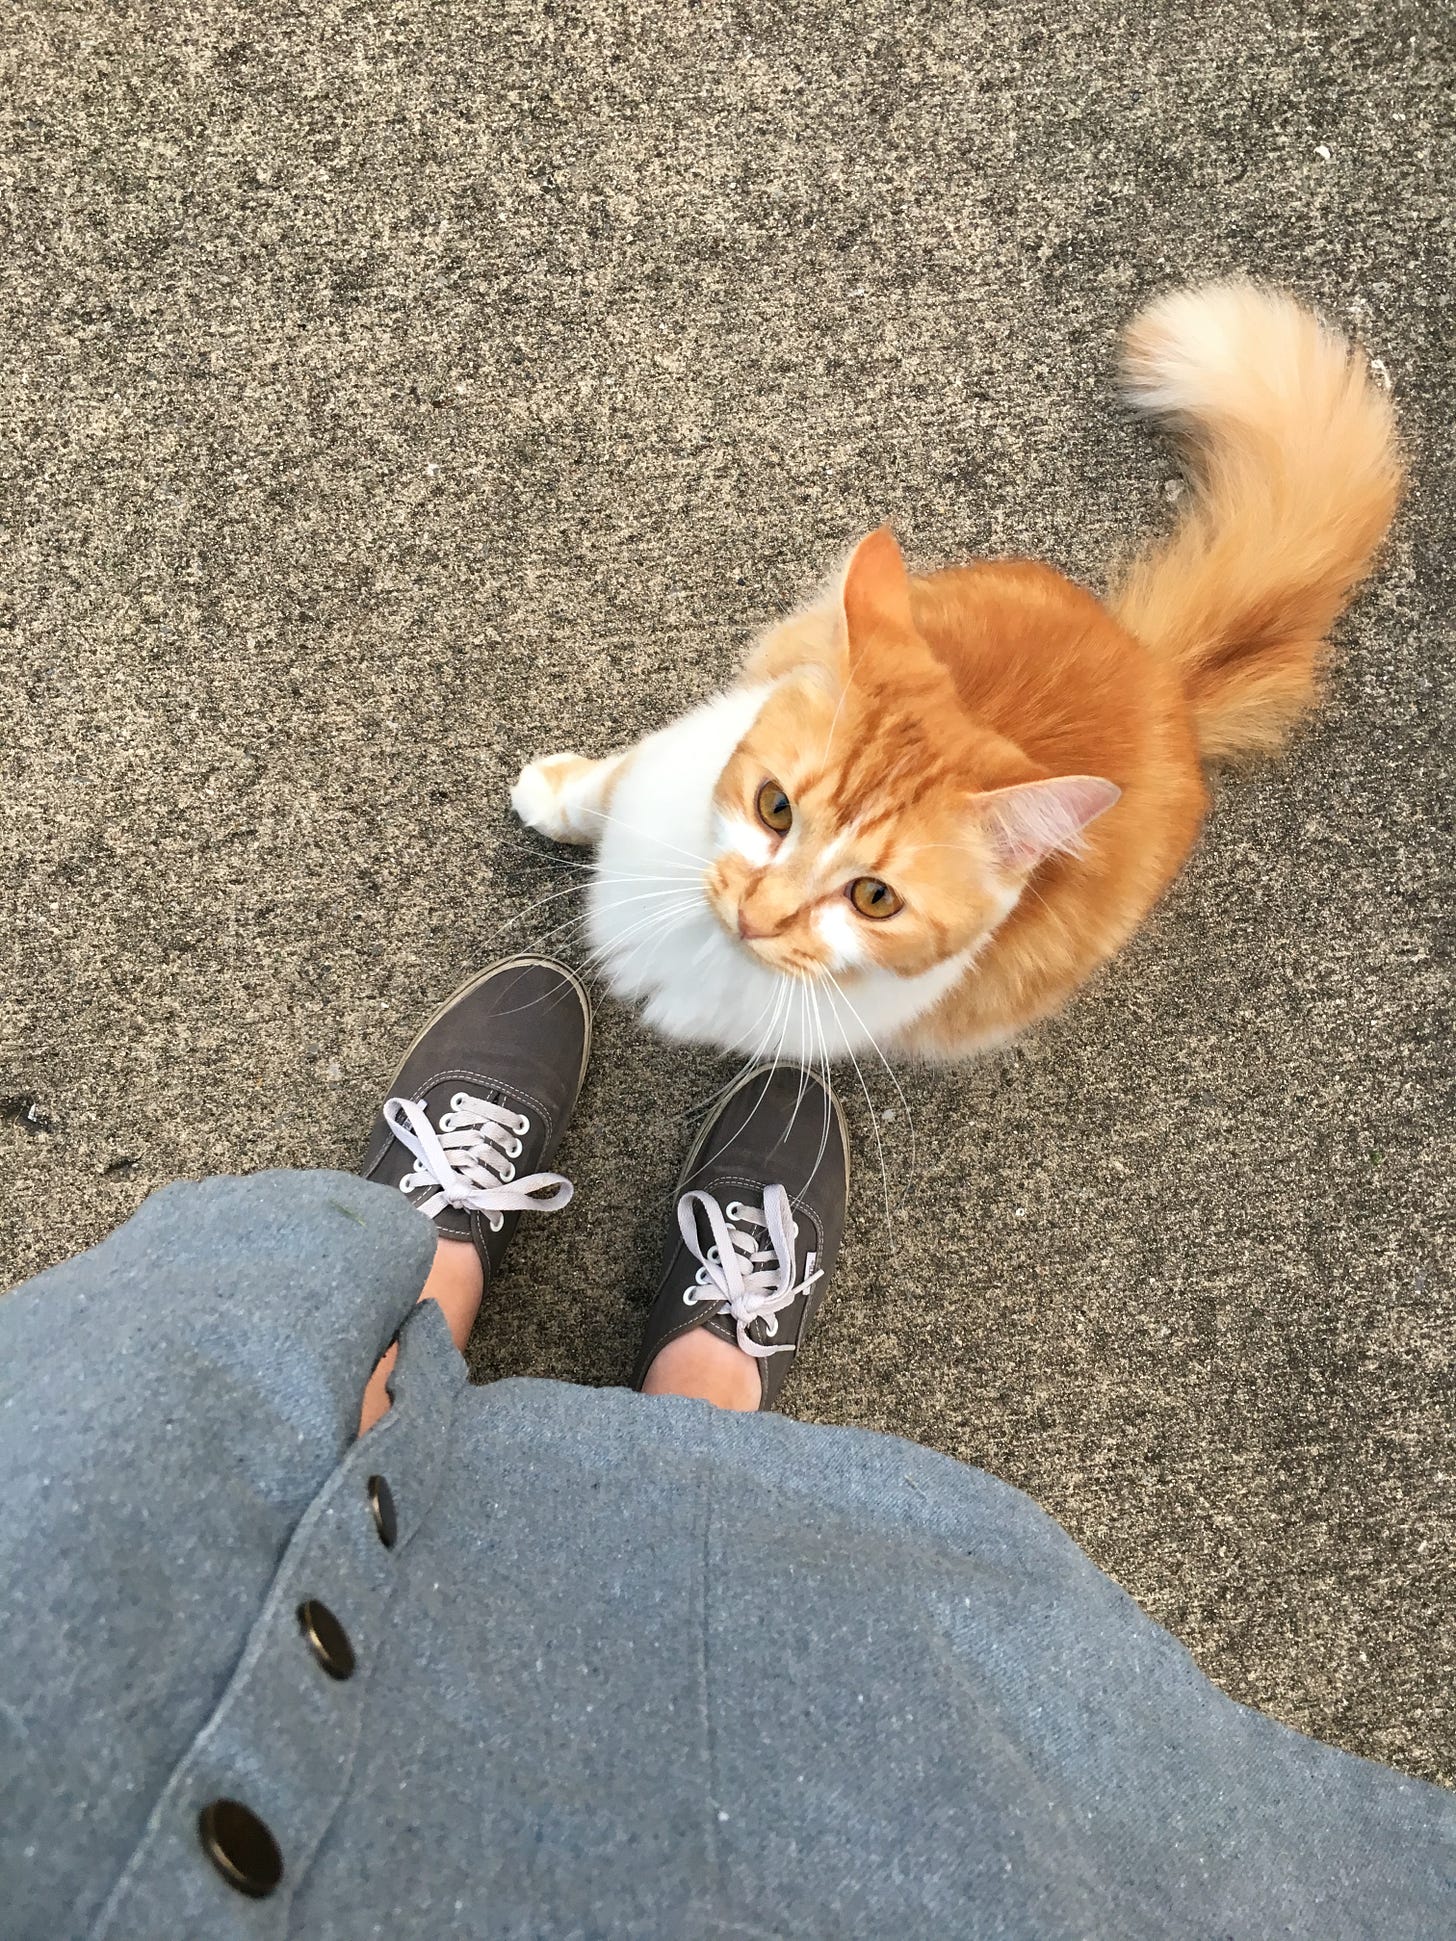 Orange and white cat sitting on sidewalk next to feet in gray sneakers